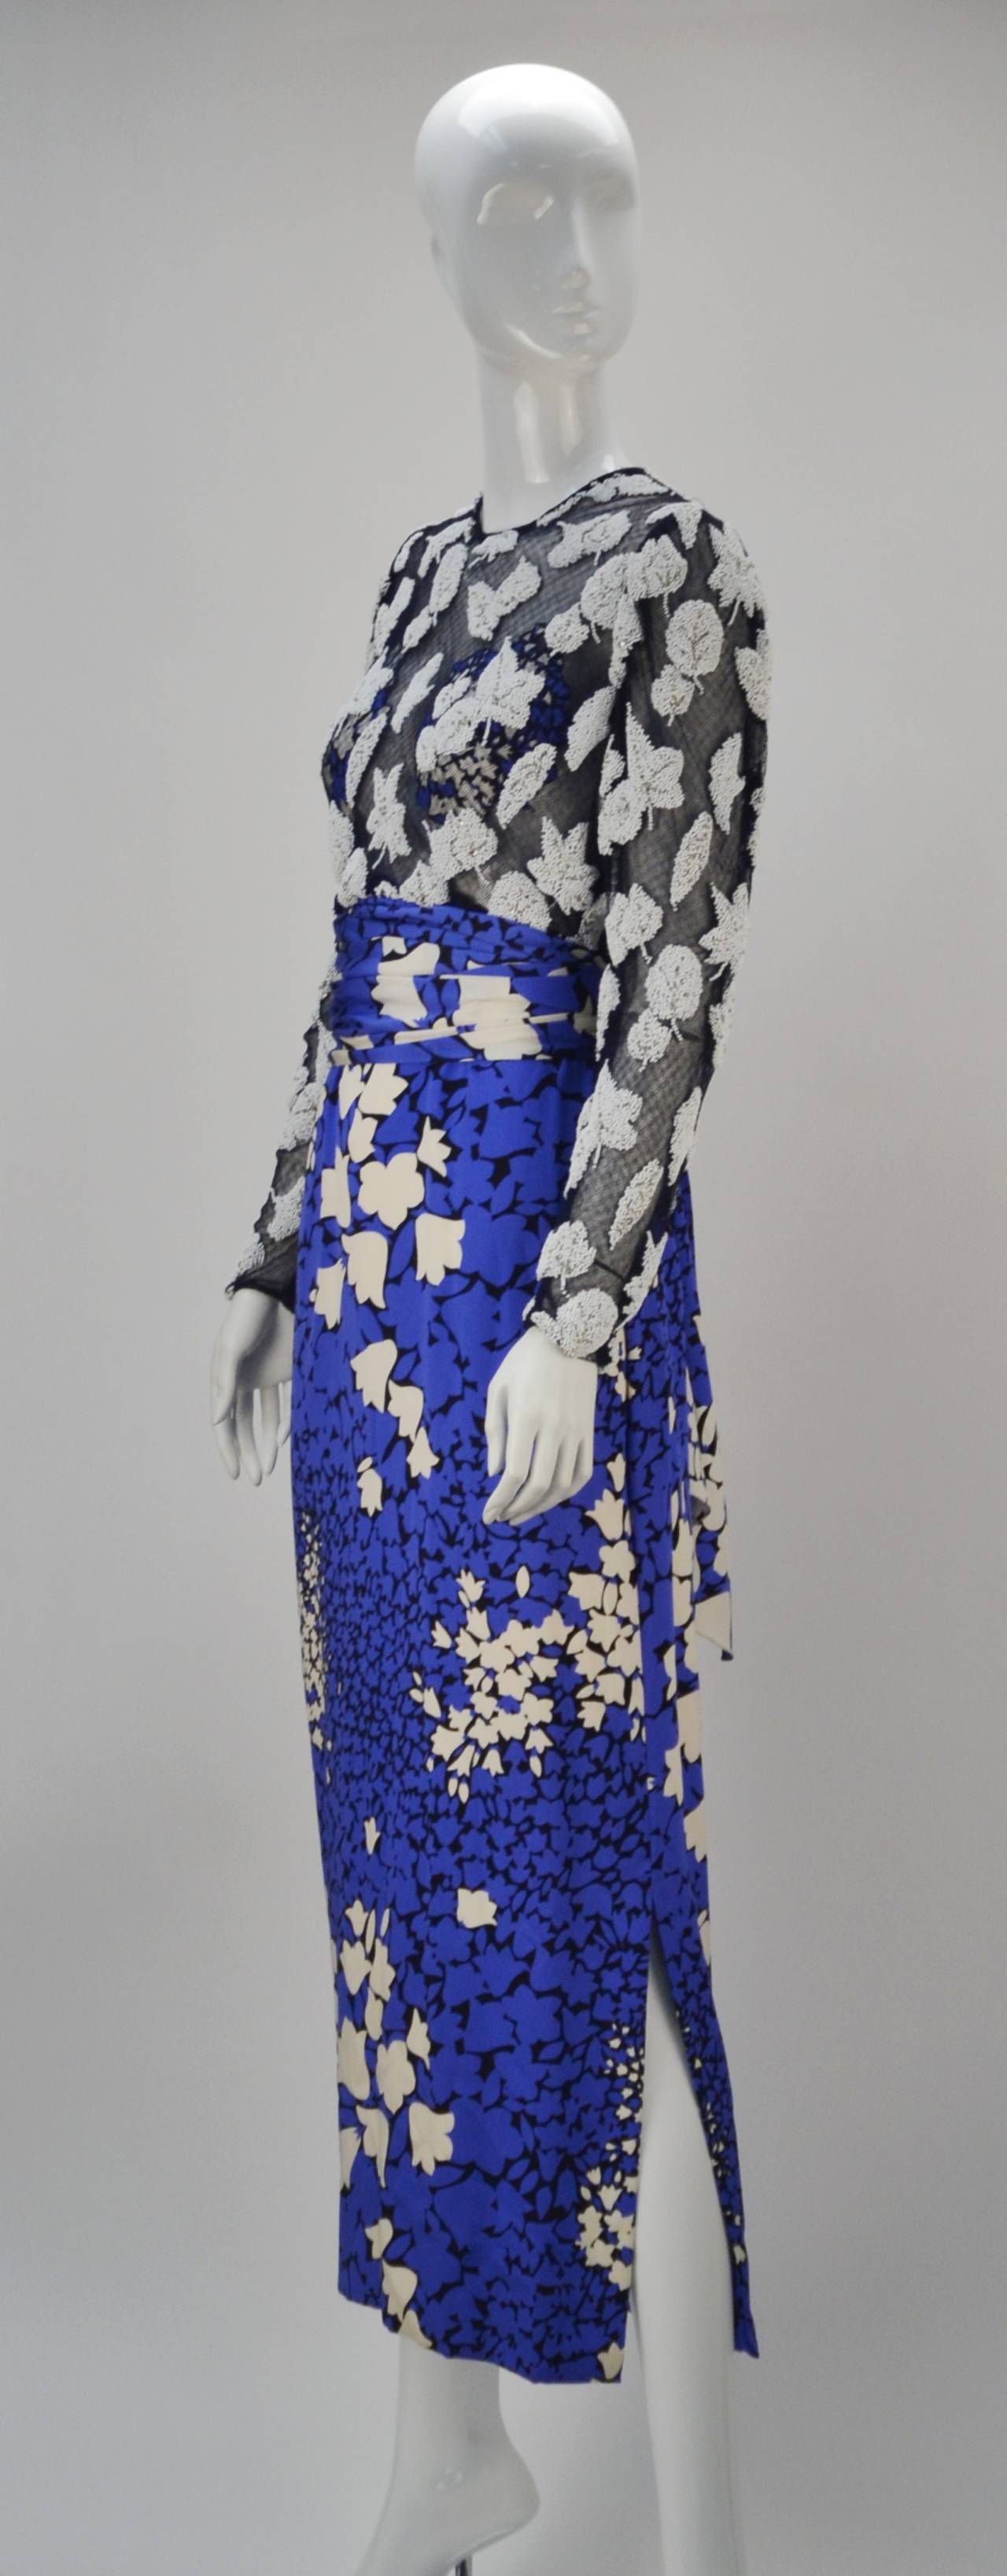 Beautiful multi-color blue, black and white silk dress with net and beaded long-sleeve bodice. There is a wide sash that ties at the waist. The bodice is sheer, however the bust area is lined. The dress fastens with a back zippered and hook-n-eye